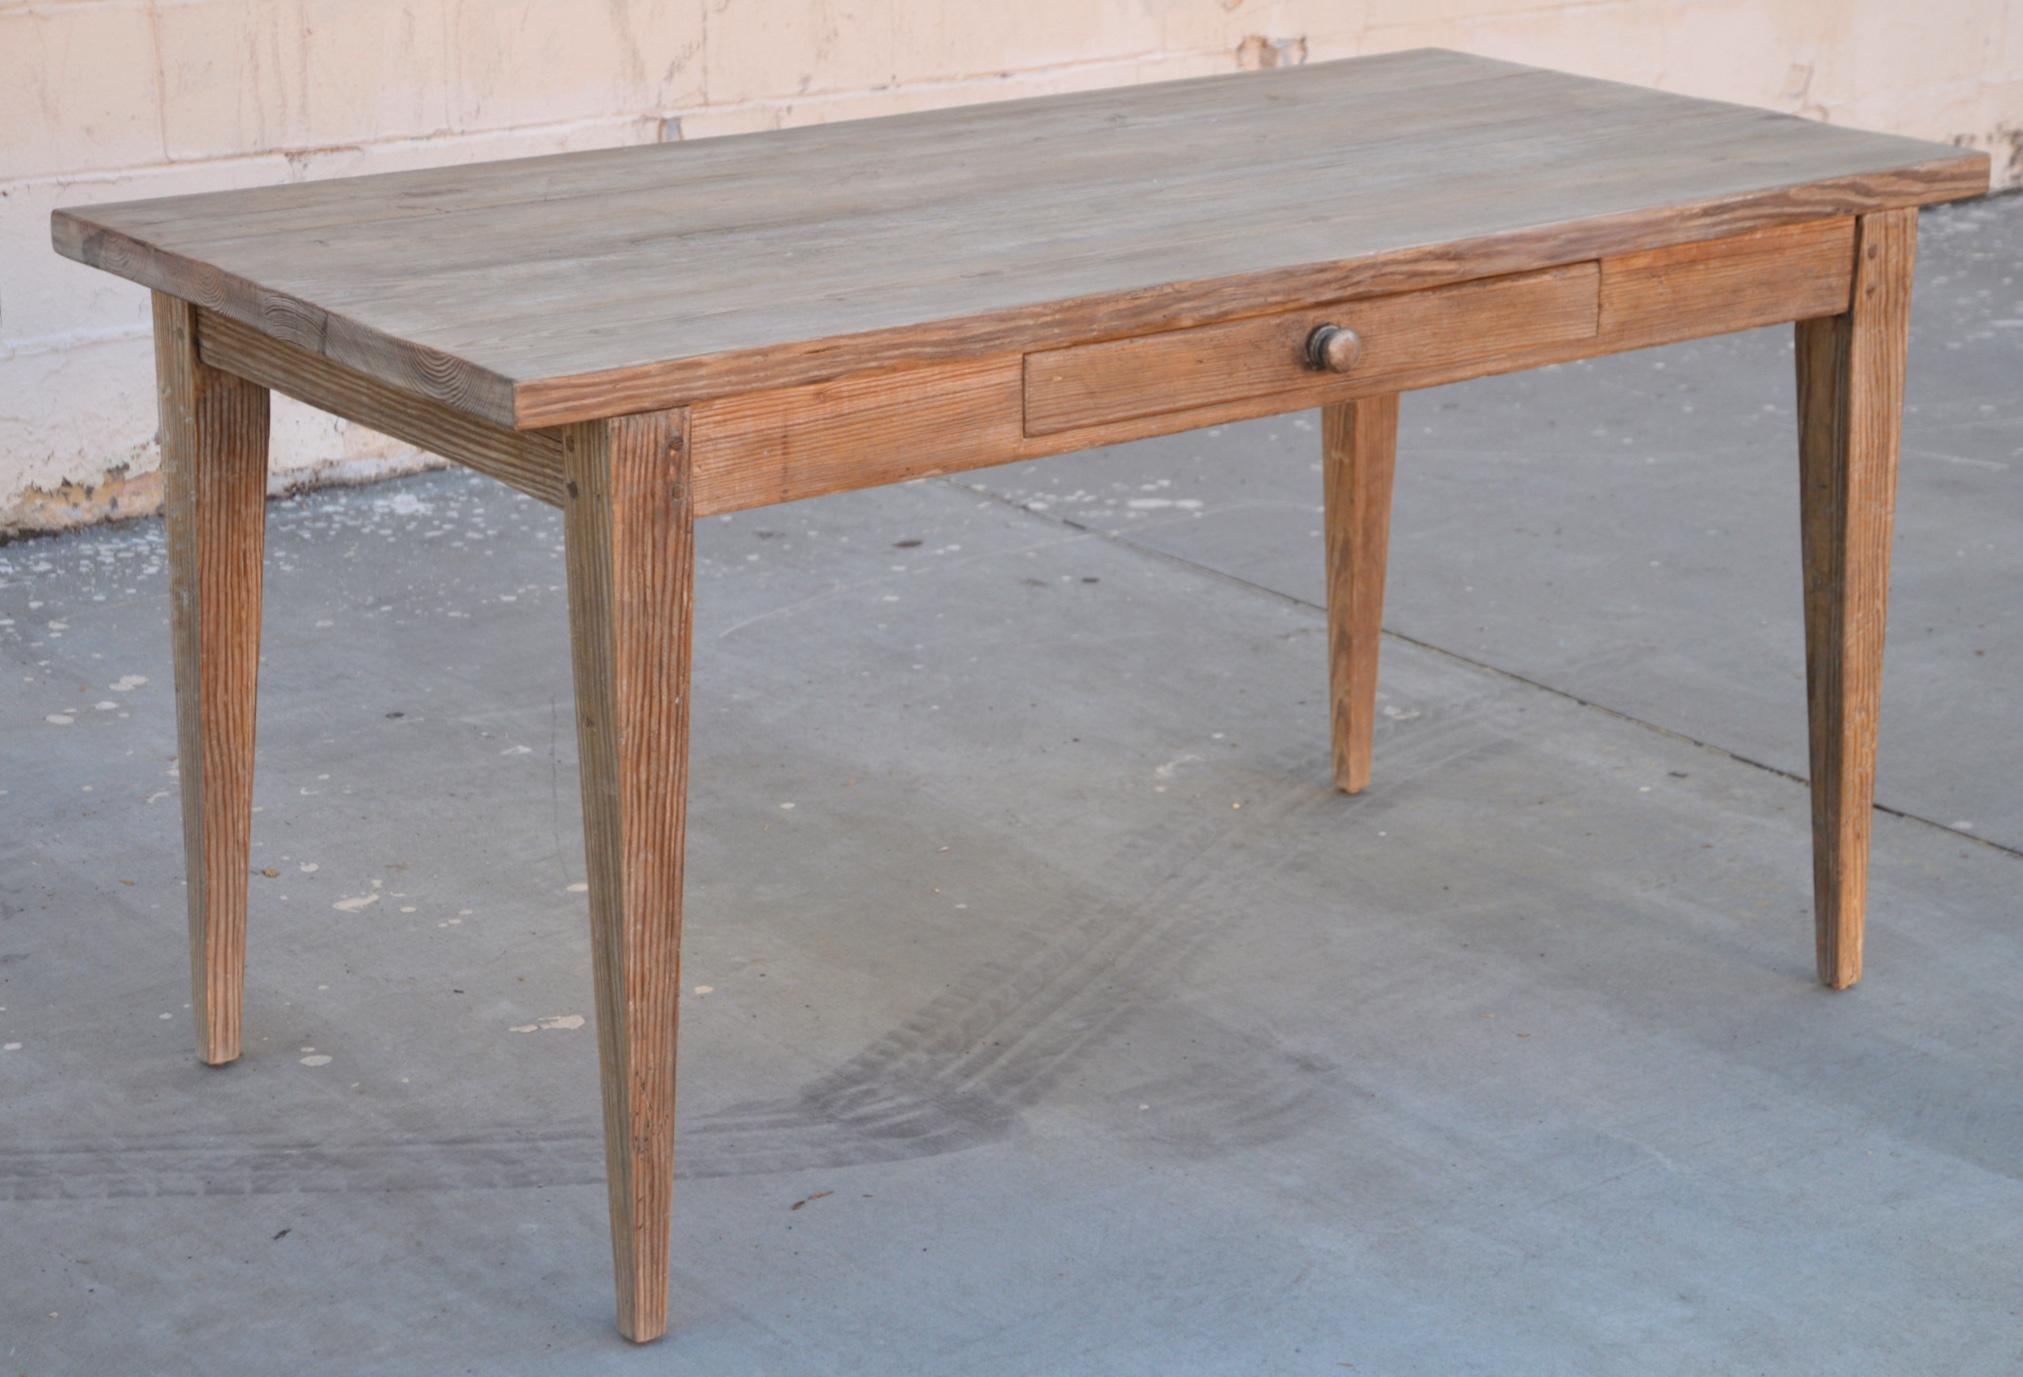 Country Harvest Table Made from Reclaimed Pine